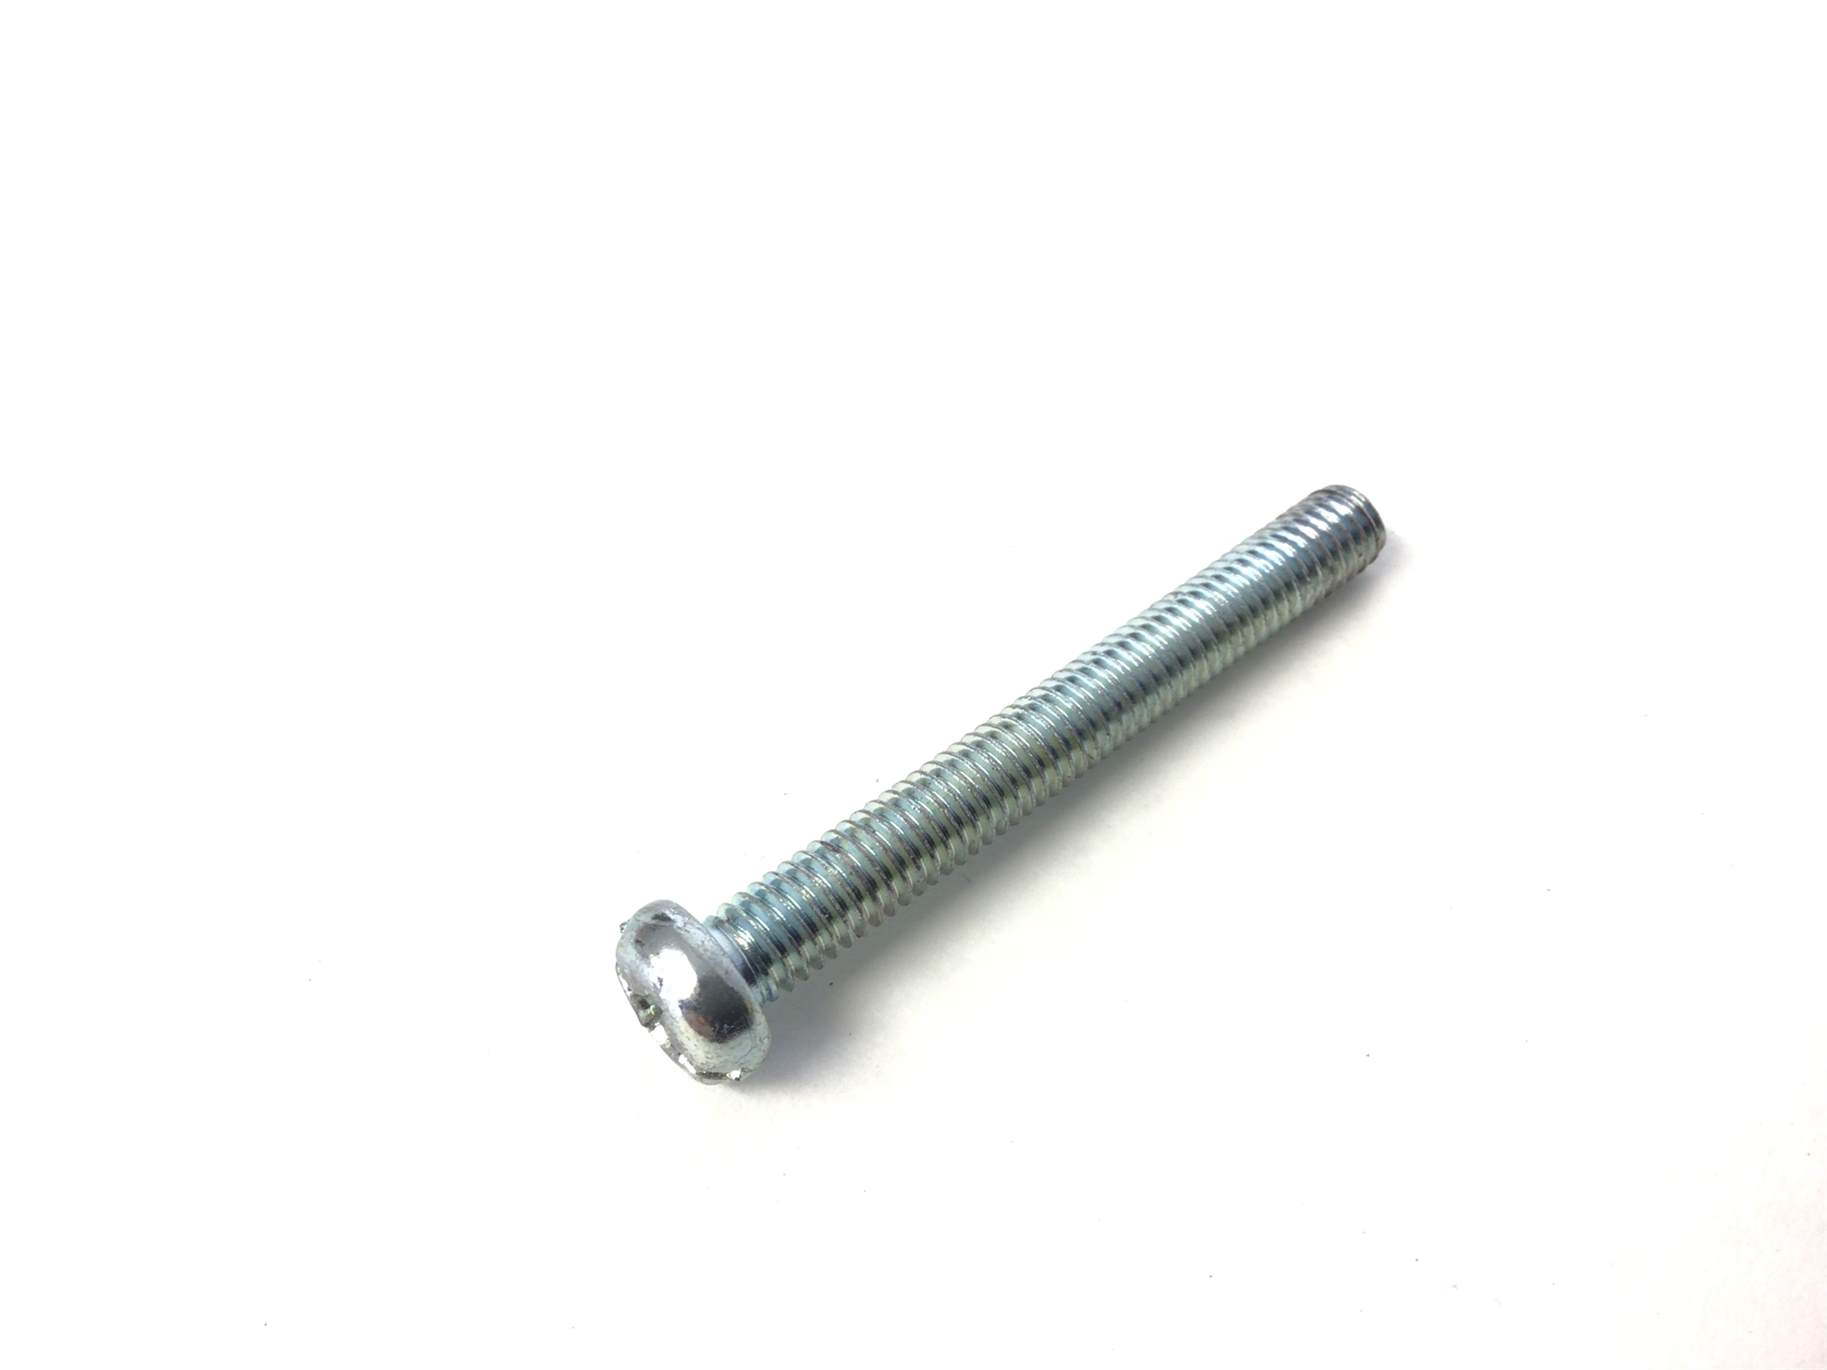 Console Screw M6-1.0-50mm (Used)